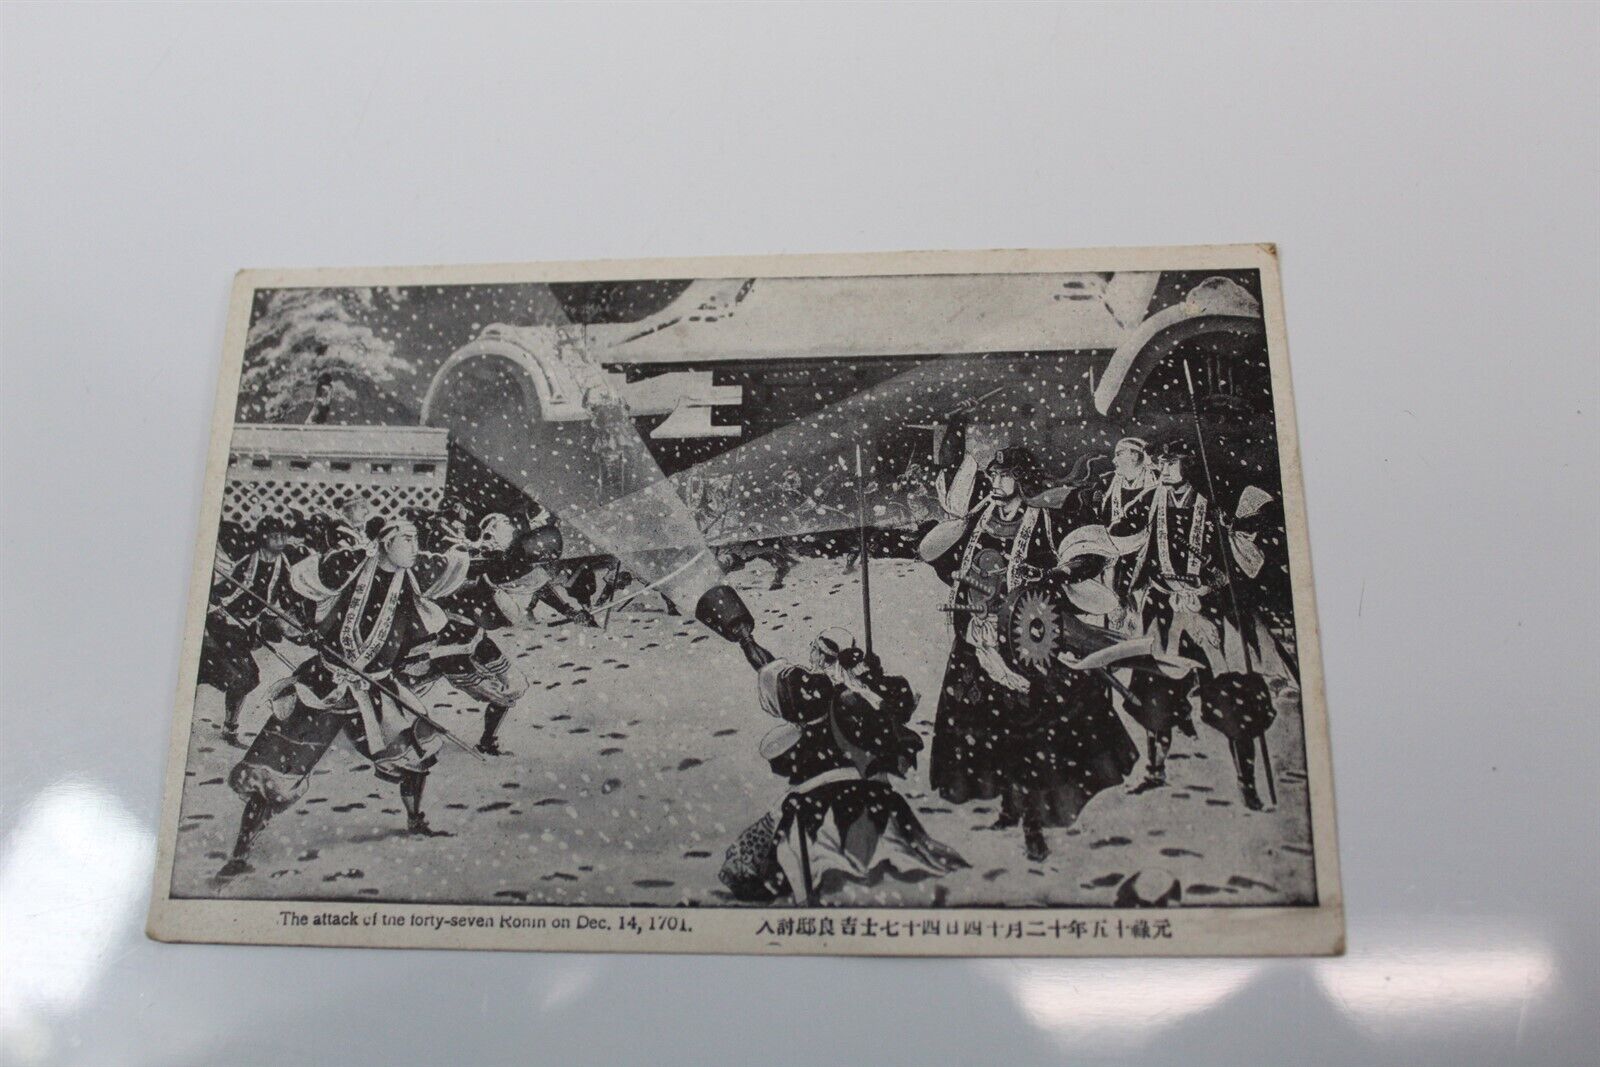 Vintage Japanese Paper Linen Post Card Attack Of The 47 Ronin Dec. 14, 1701